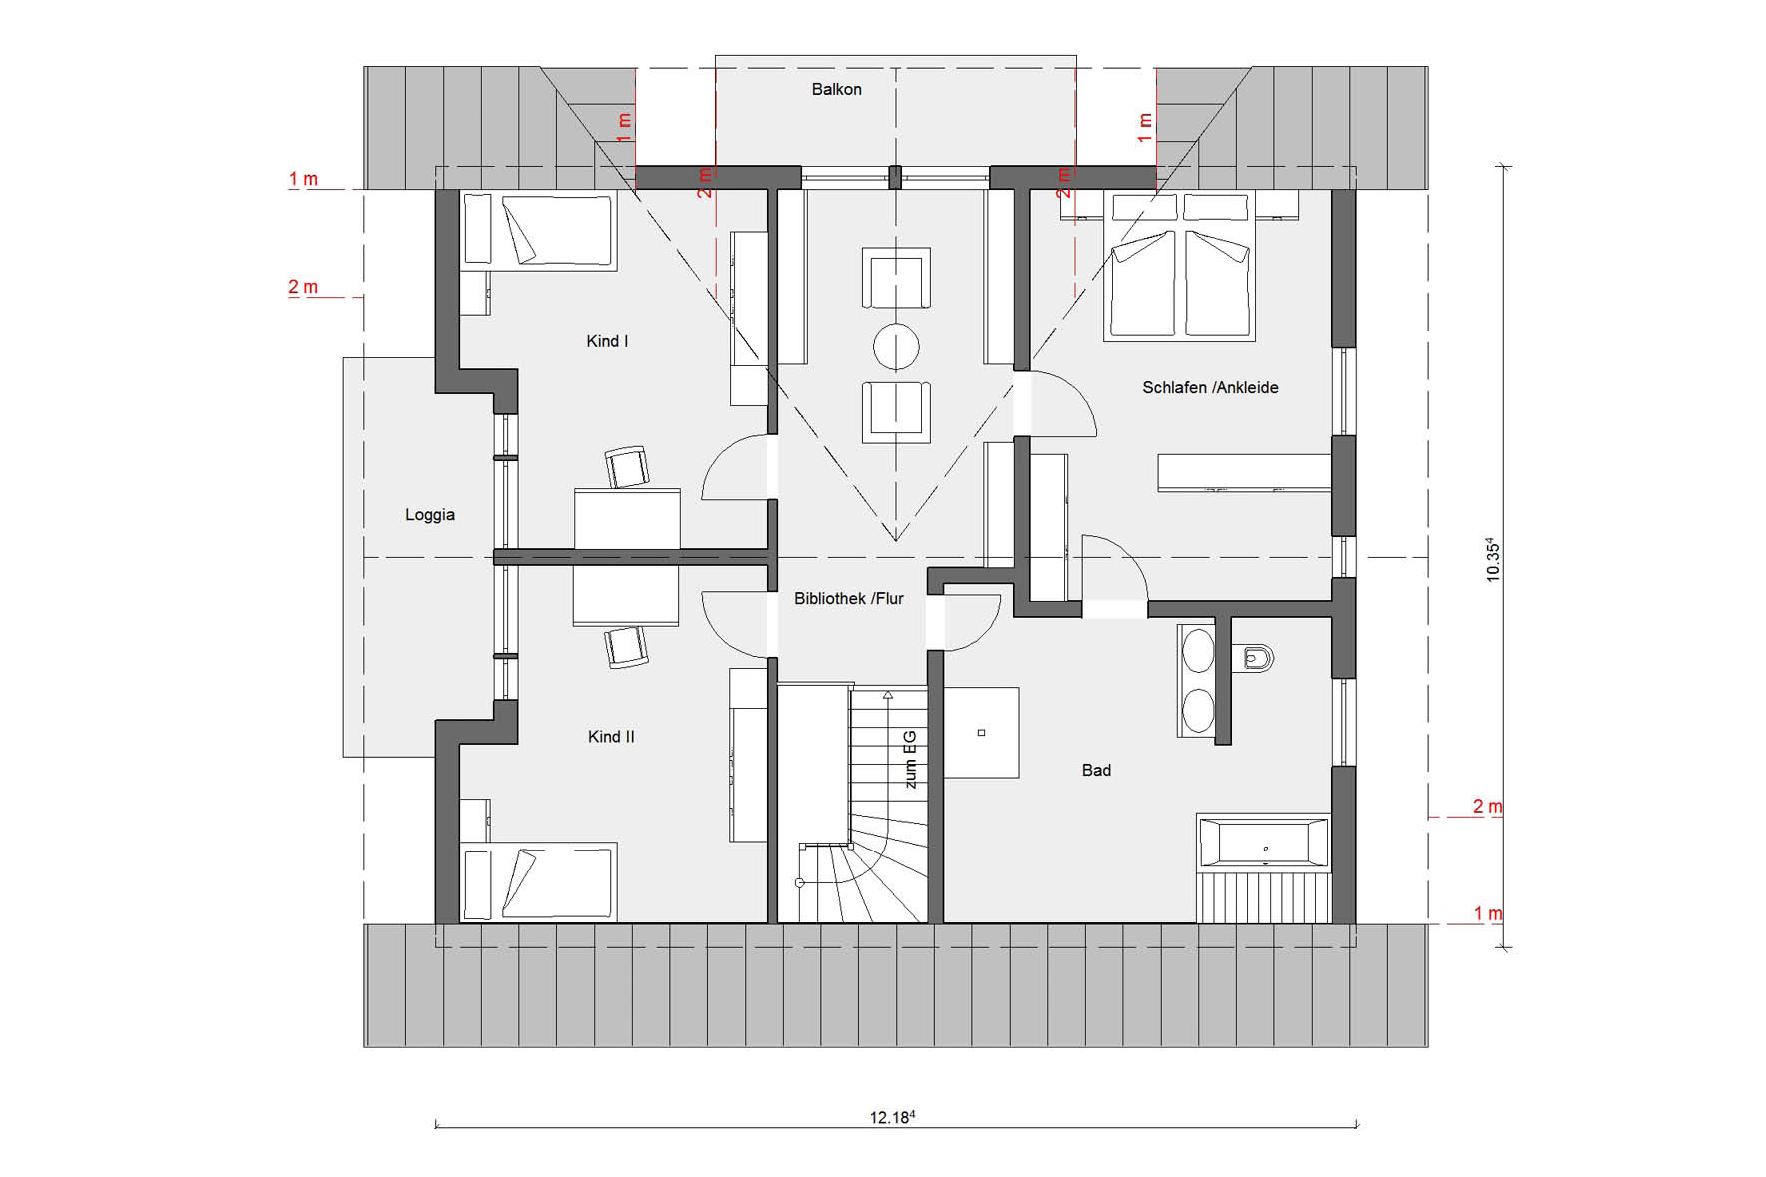 Floor plan attic E 15-205.1 House with conservatory